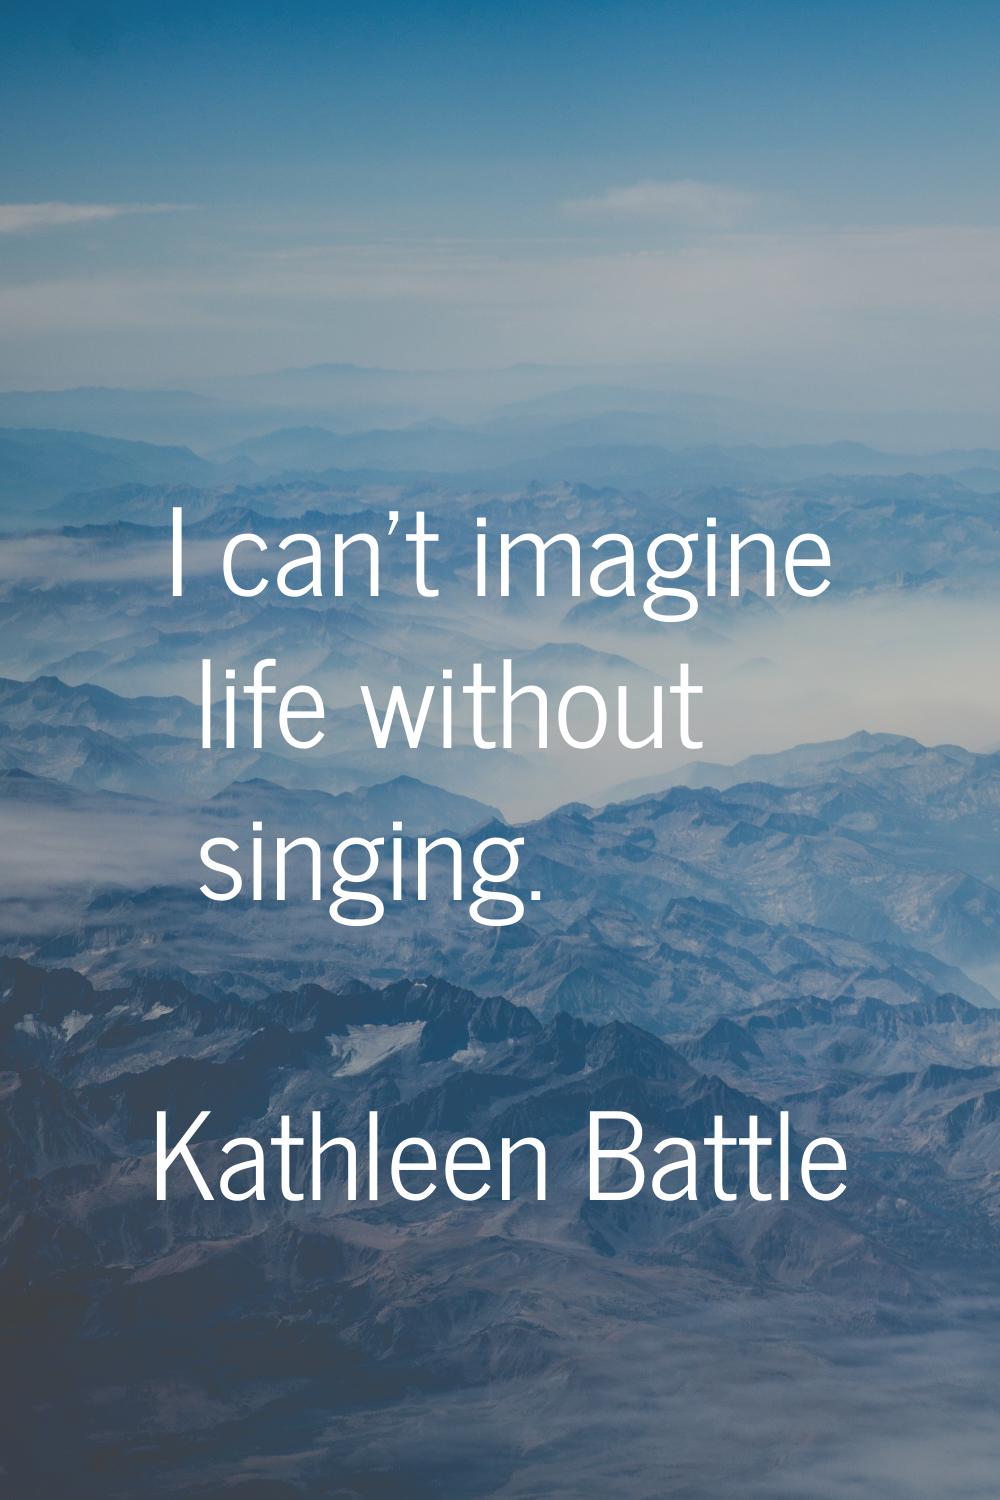 I can't imagine life without singing.